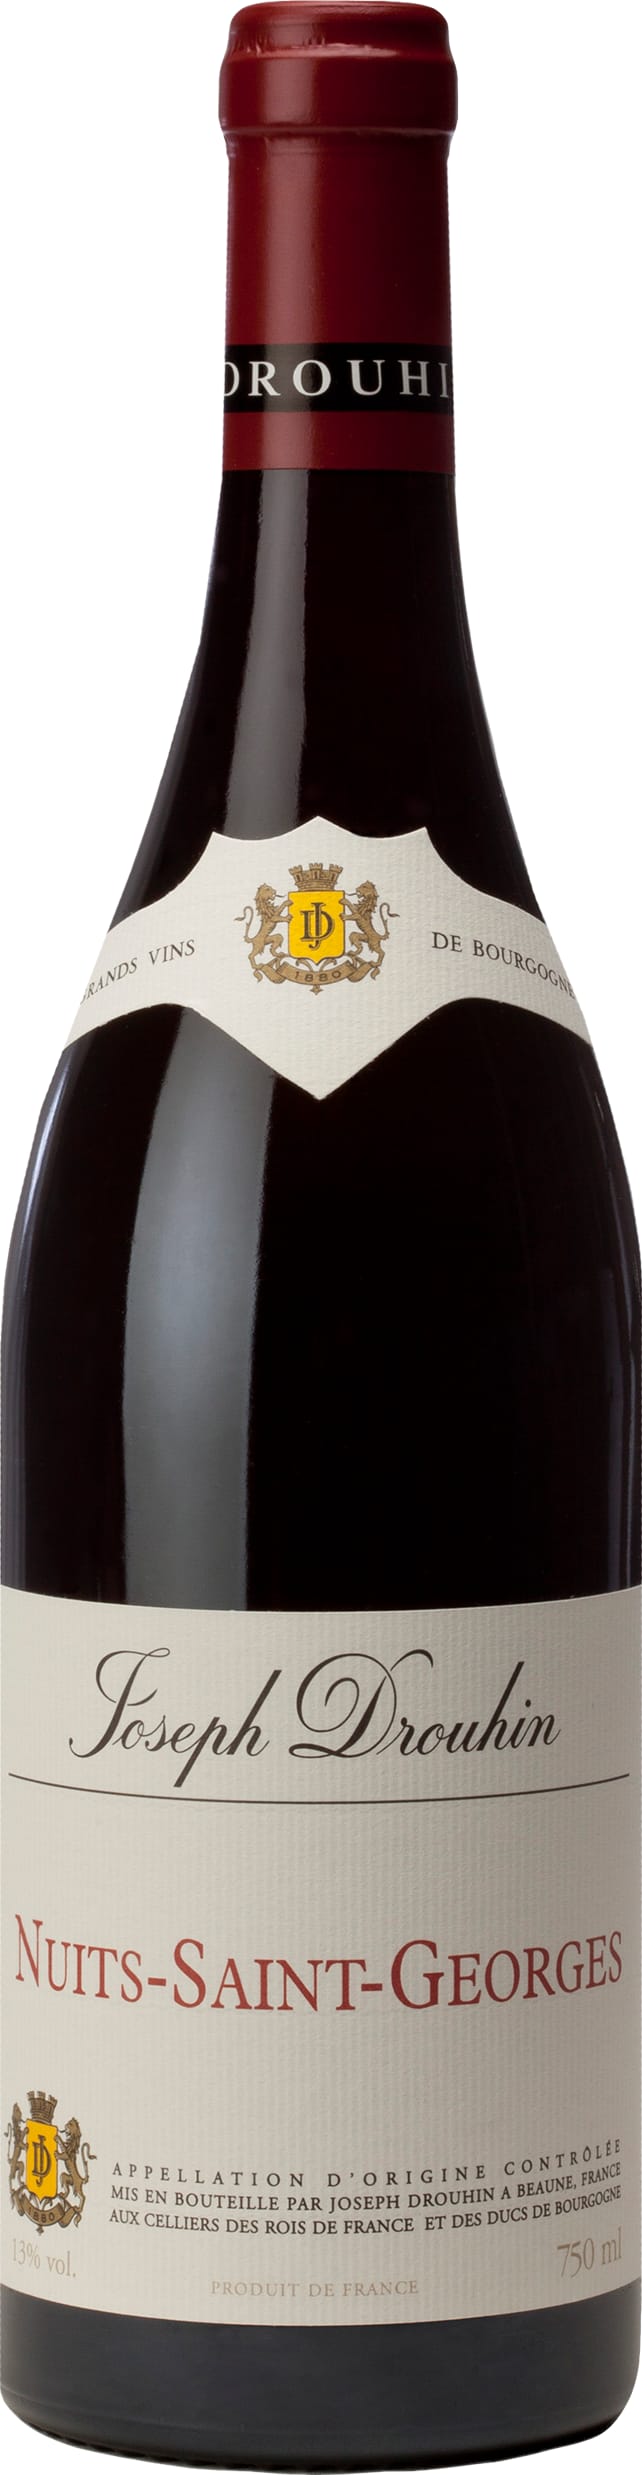 Joseph Drouhin Nuits-Saint-Georges 2021 75cl - Buy Joseph Drouhin Wines from GREAT WINES DIRECT wine shop